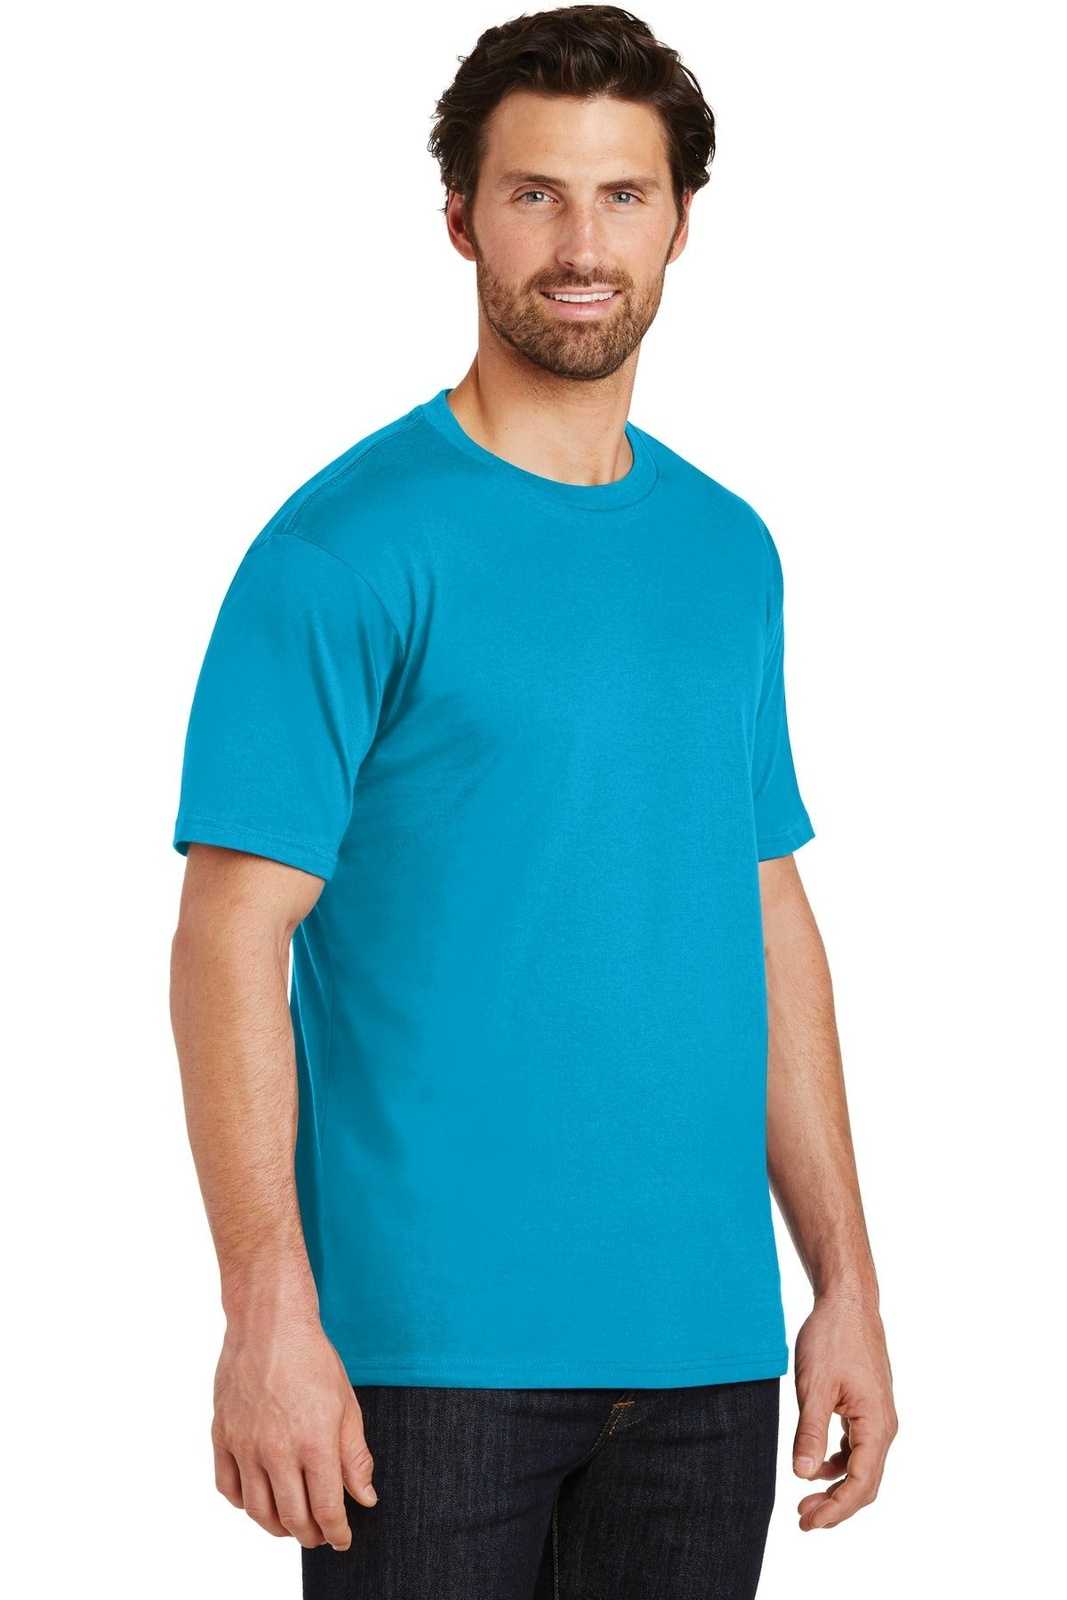 District DT104 Perfect Weight Tee - Bright Turquoise - HIT a Double - 4